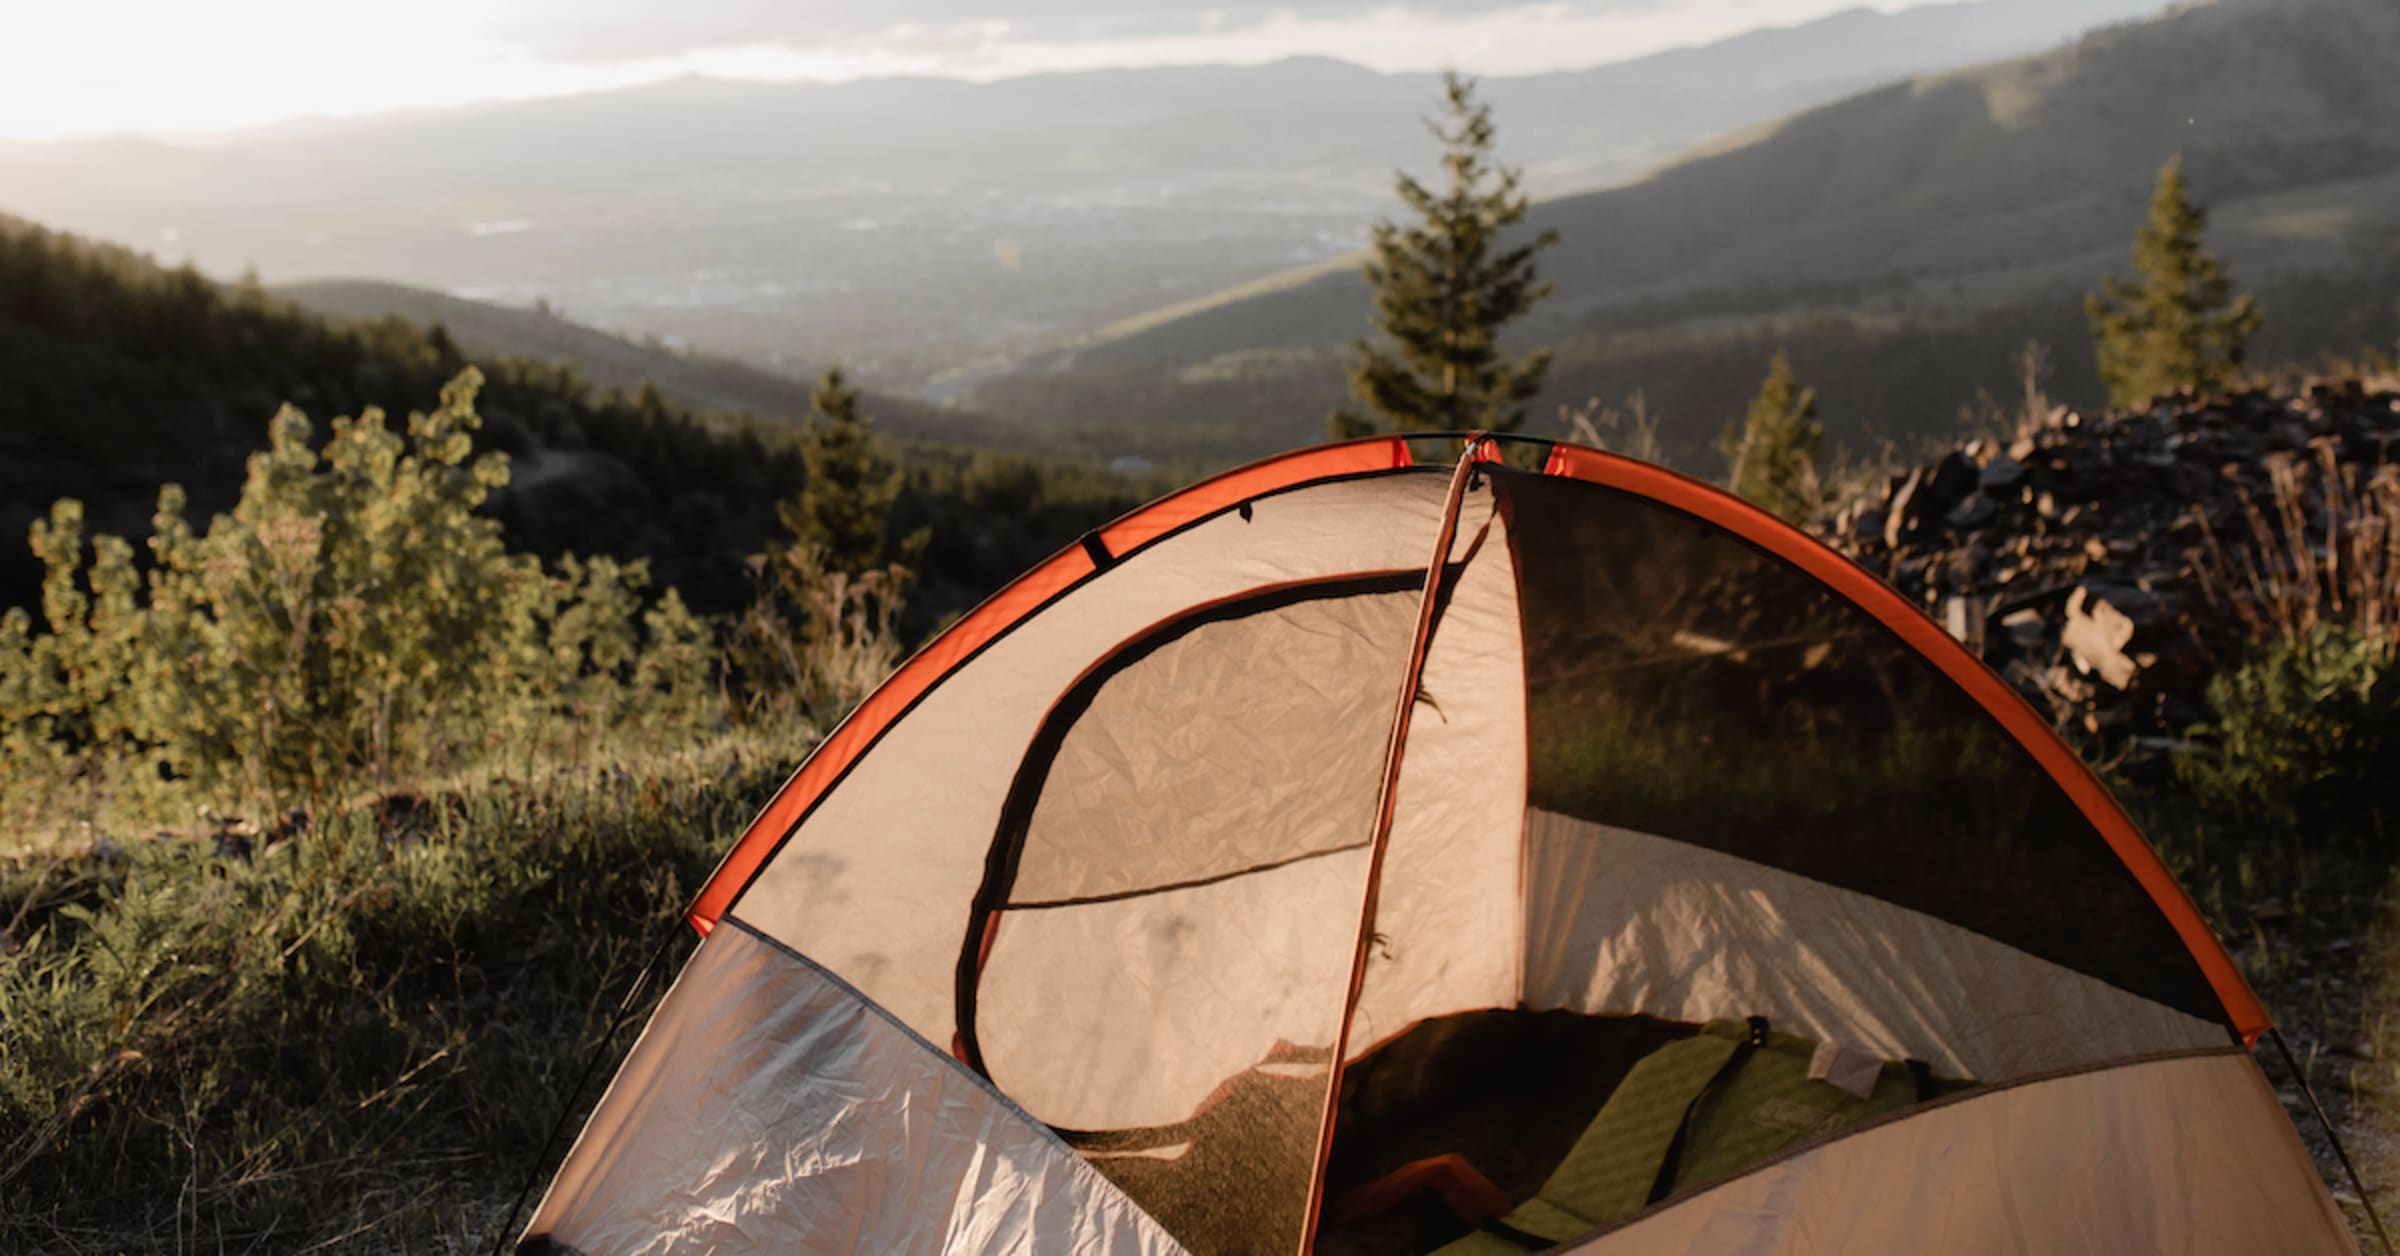 Bear Safety: Hosting and Camping Responsibly in Bear Country